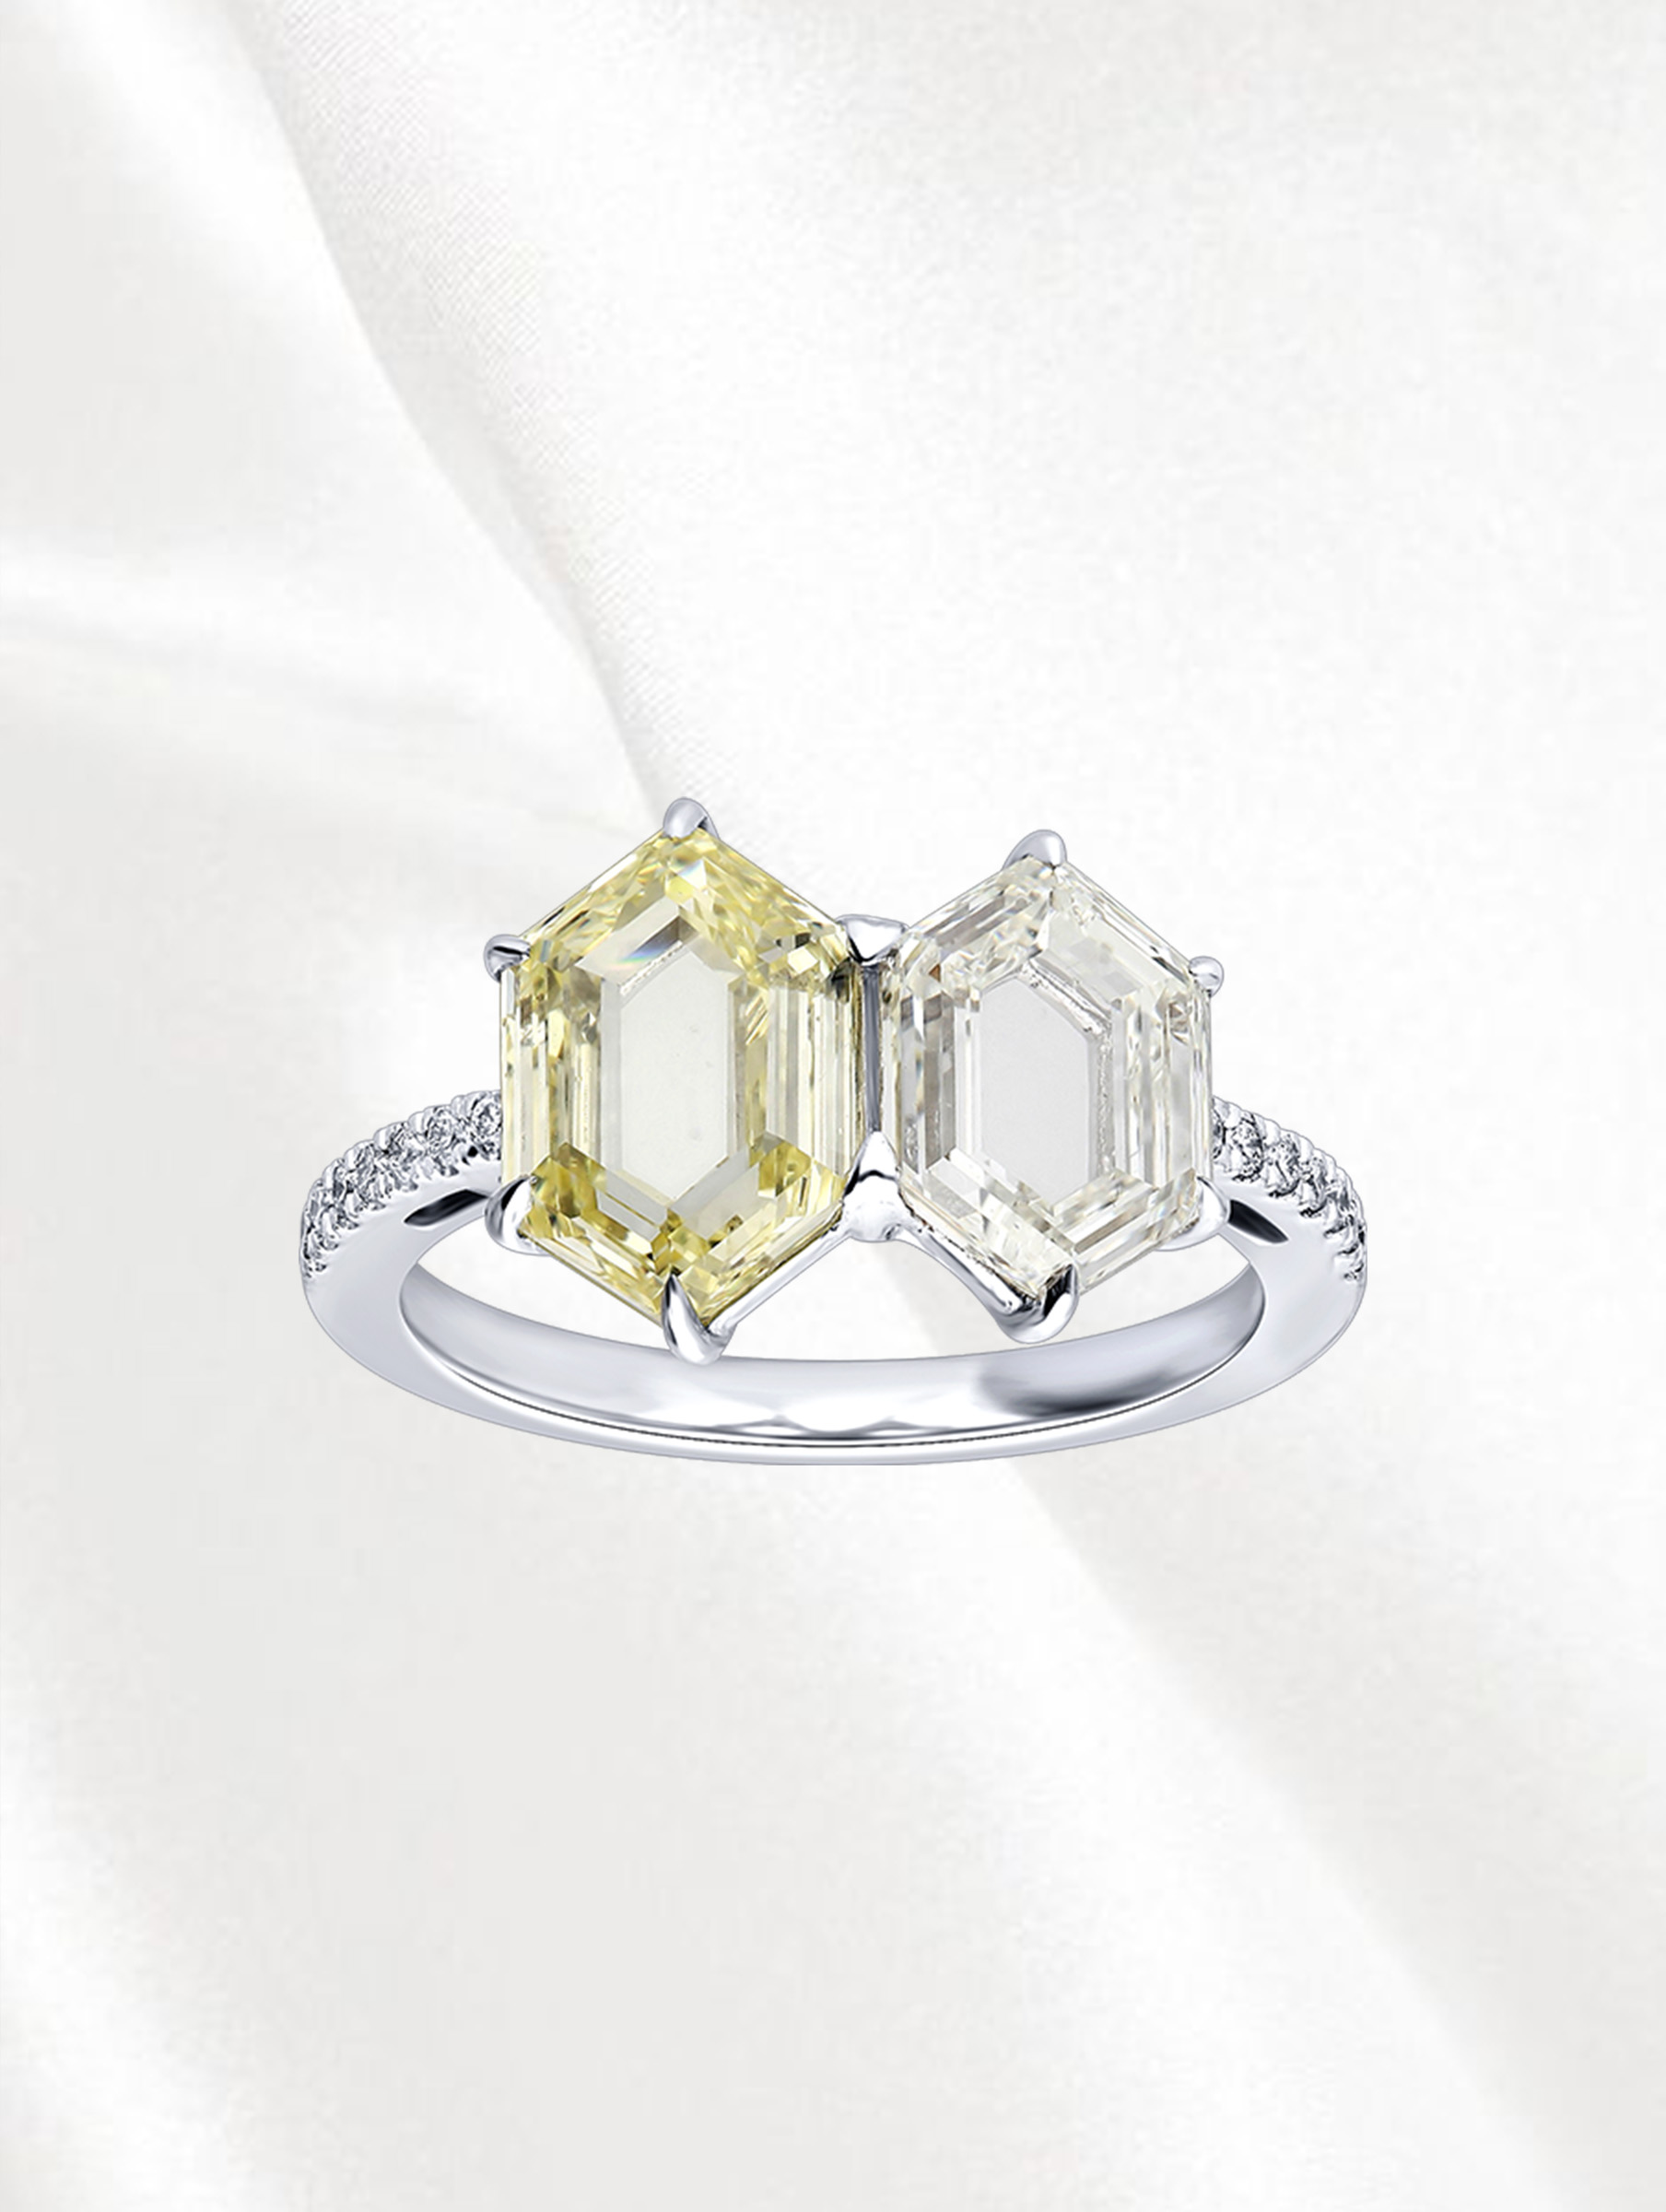 Toi et moi ring featuring two coloured diamonds from ARAYA Fine Jewellery 